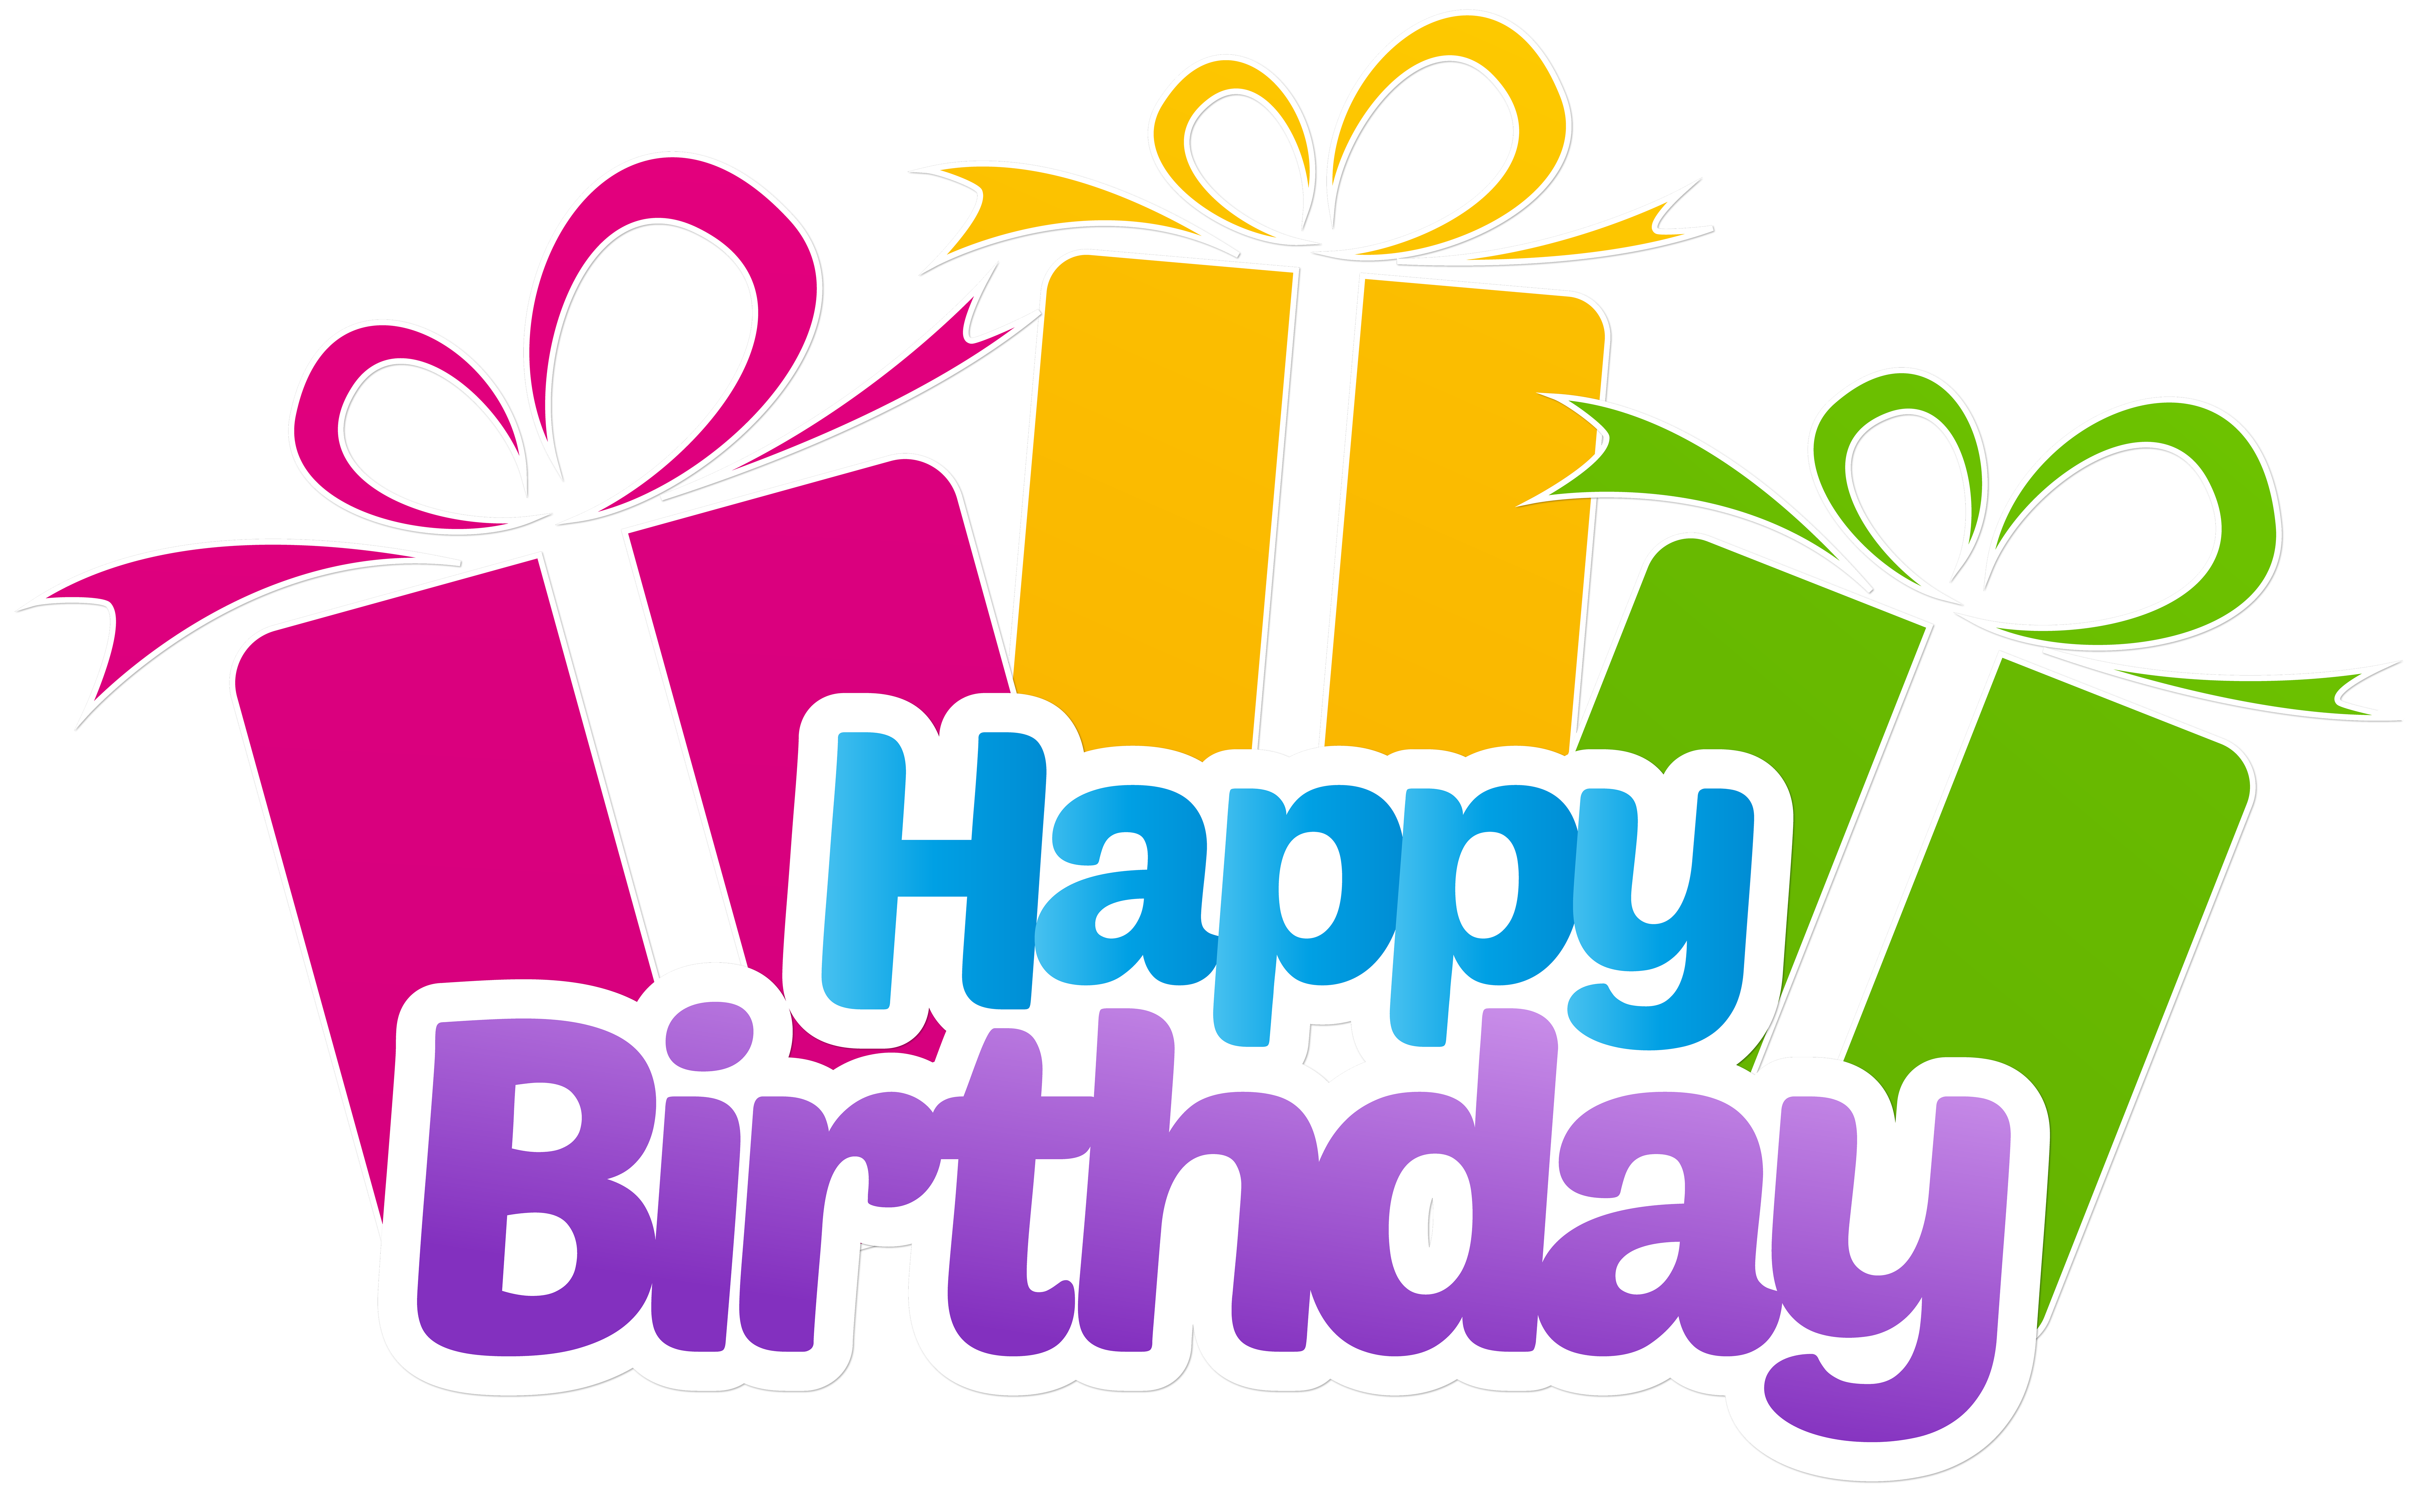 Happy Birthday With Gifts Png Clip Art Image Gallery Yopriceville High Quality Images And Transparent Png Free Clipart